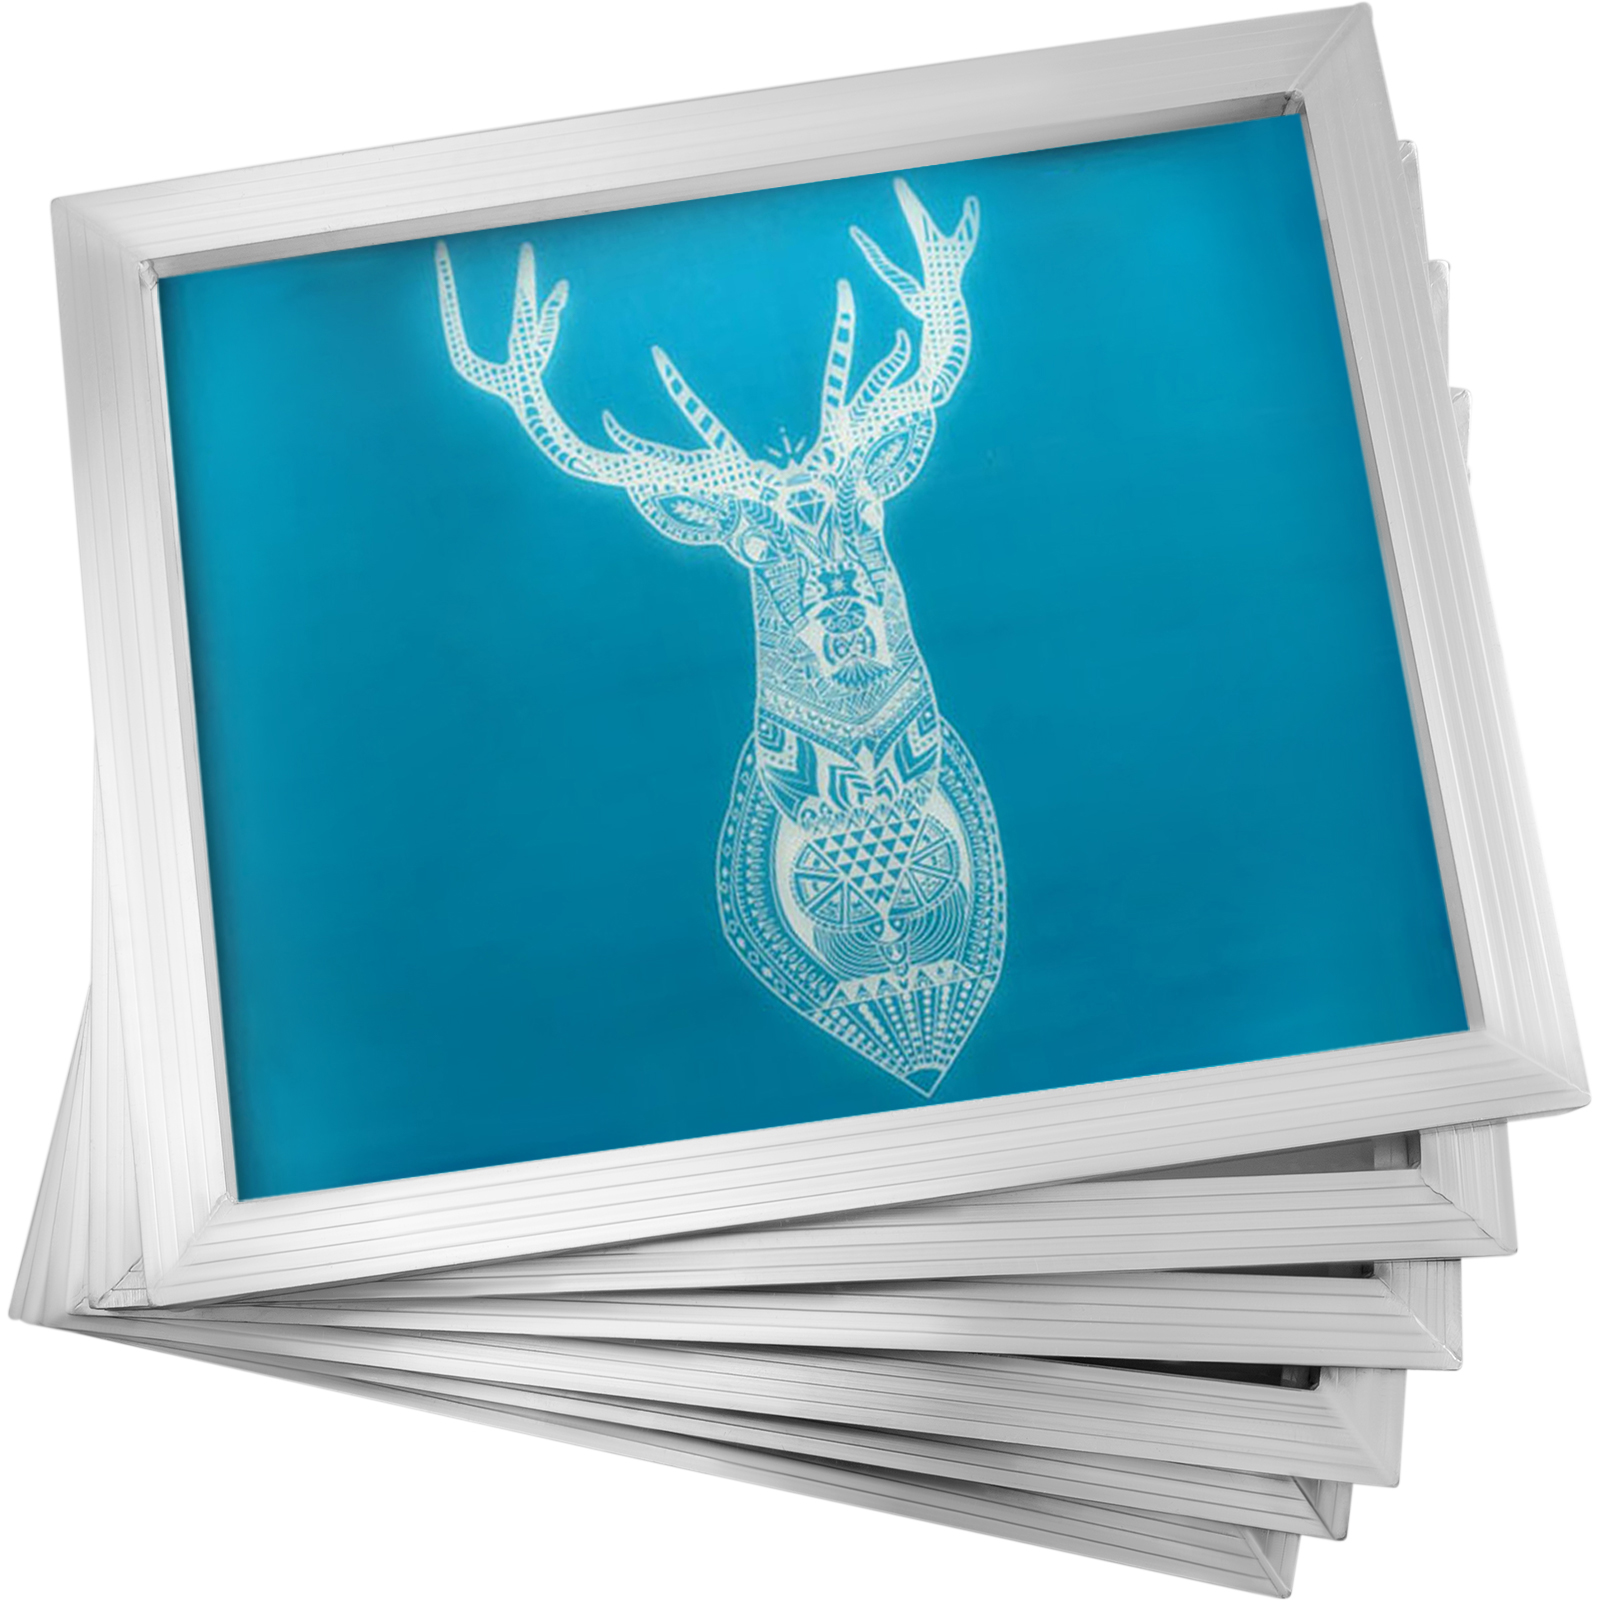 6 Pack Screens 20 x 24 Inch Pre-stretched Aluminum Silk Screen Printing Frames with 180 White Mesh